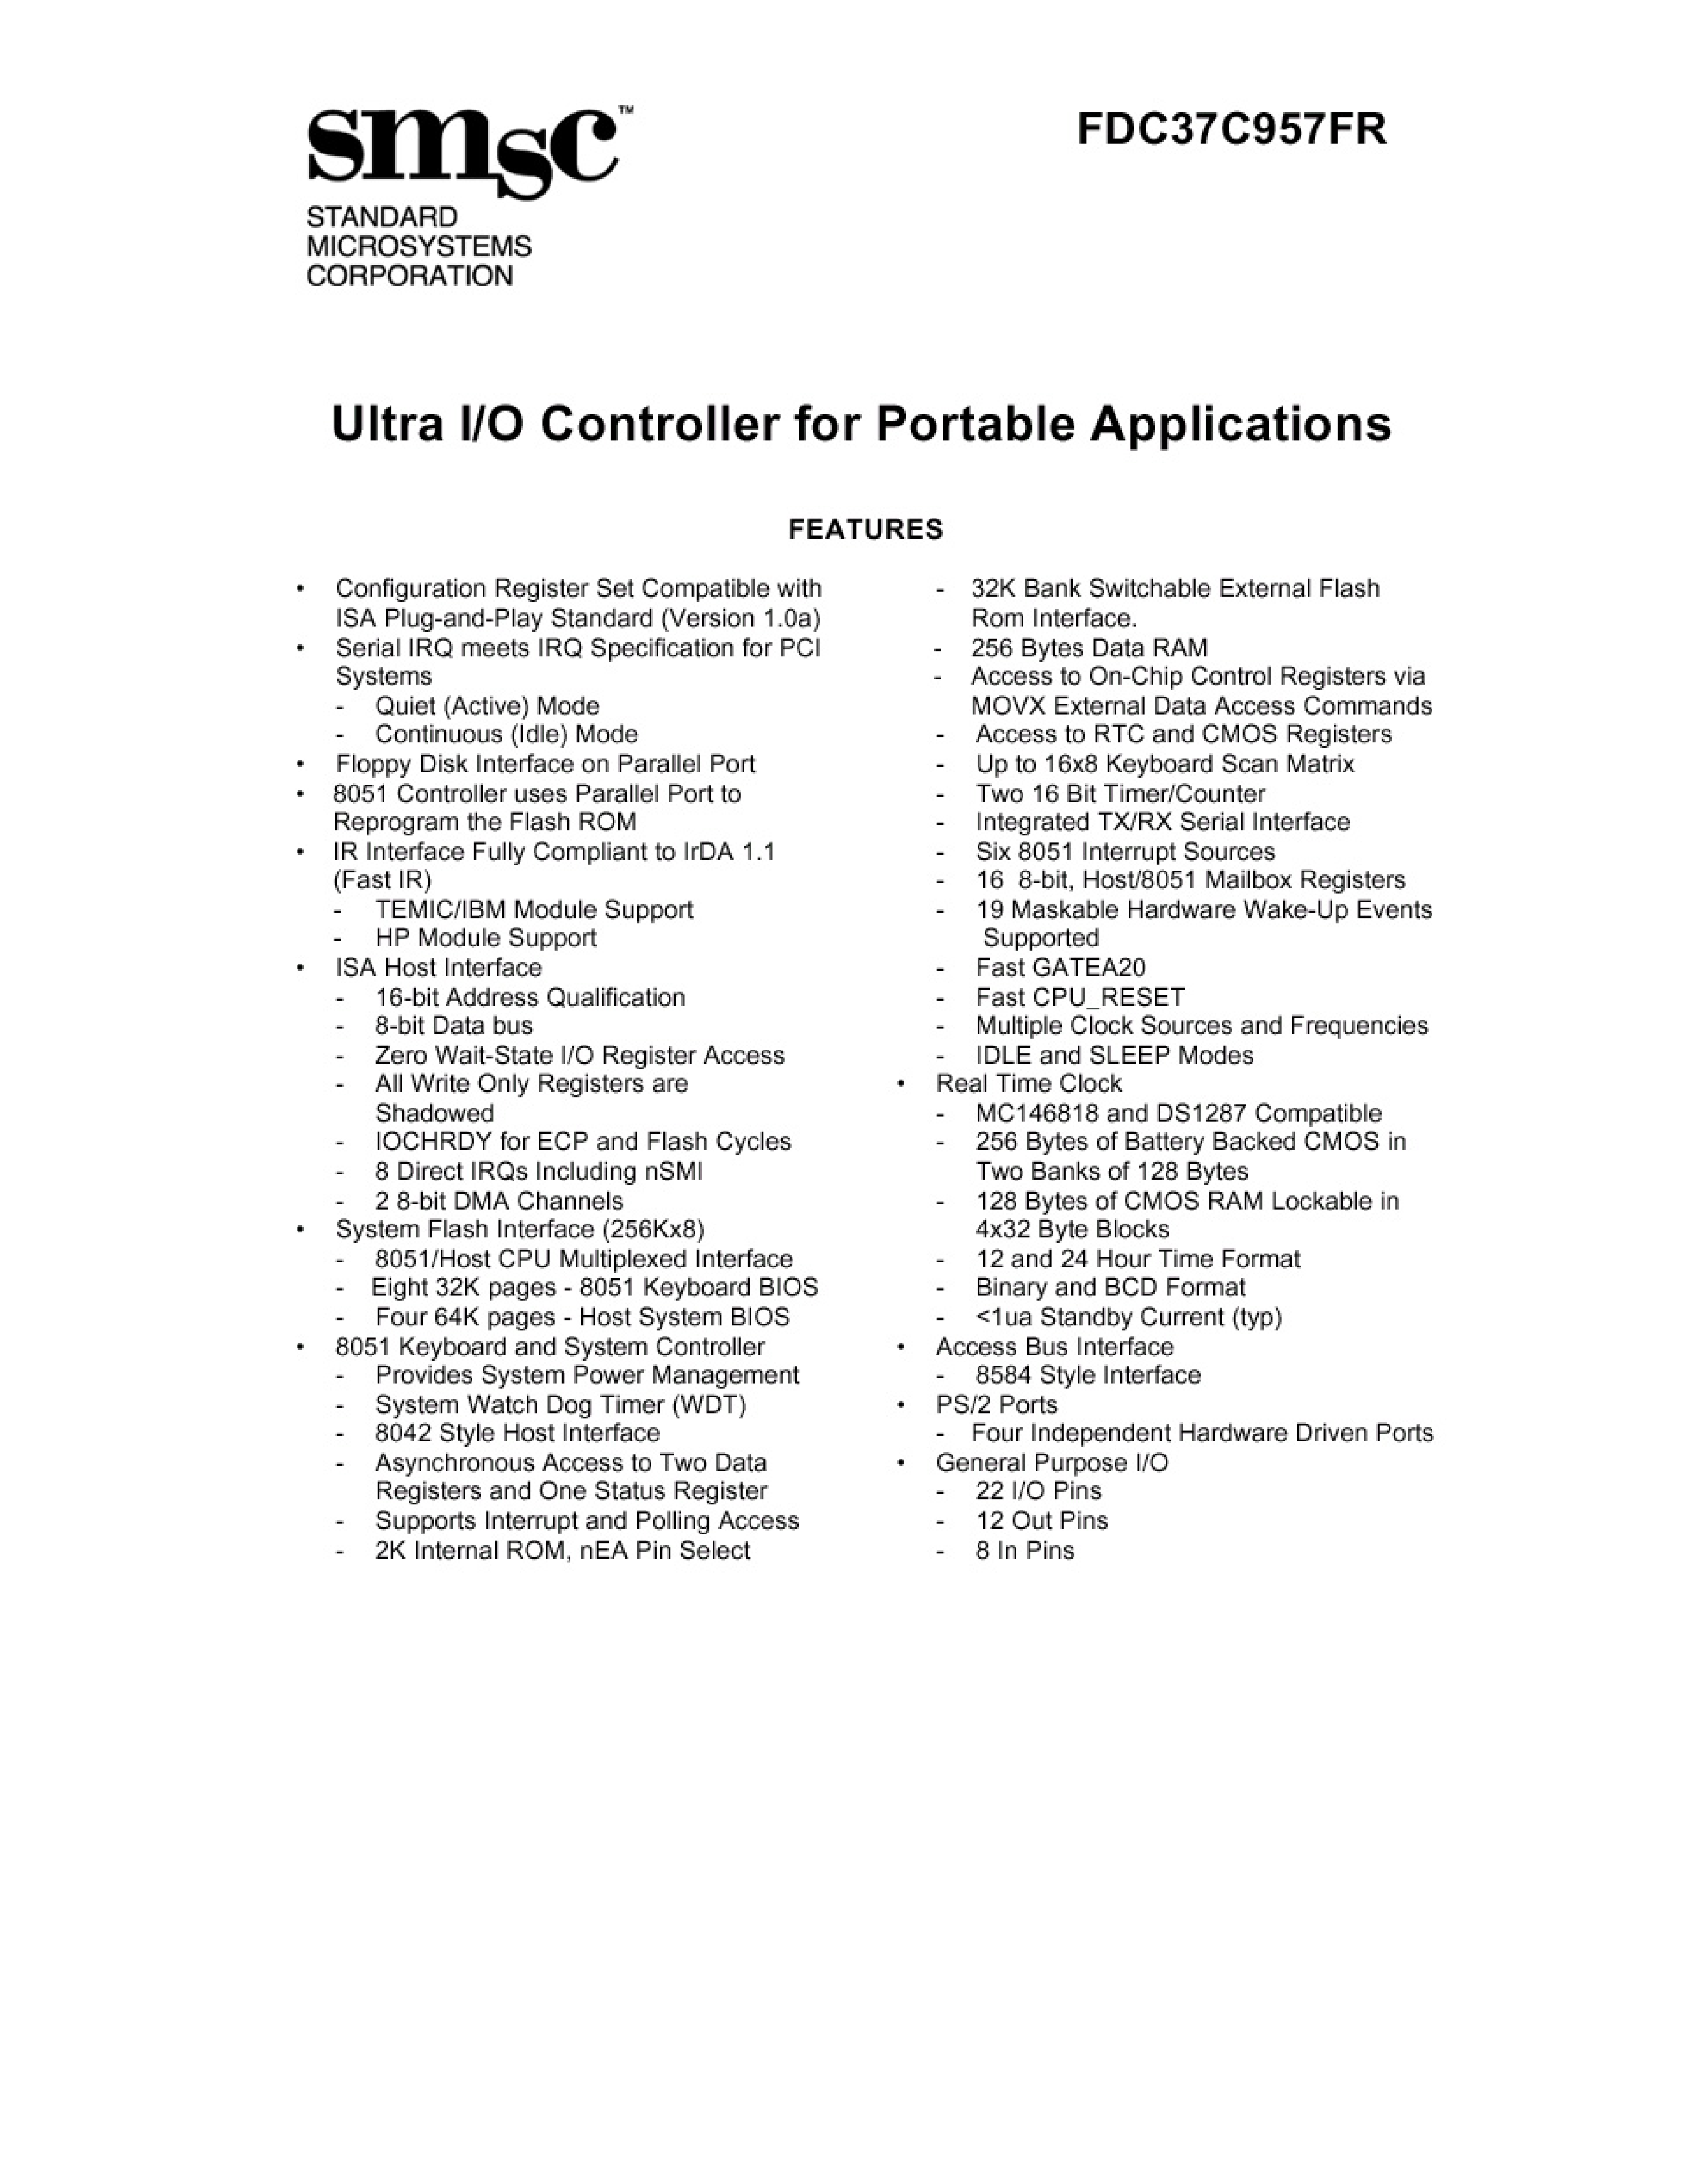 Datasheet FDC37C957FR - ULTRA I/O CONTROLLER FOR PORTABLE APPLICATIONS page 1